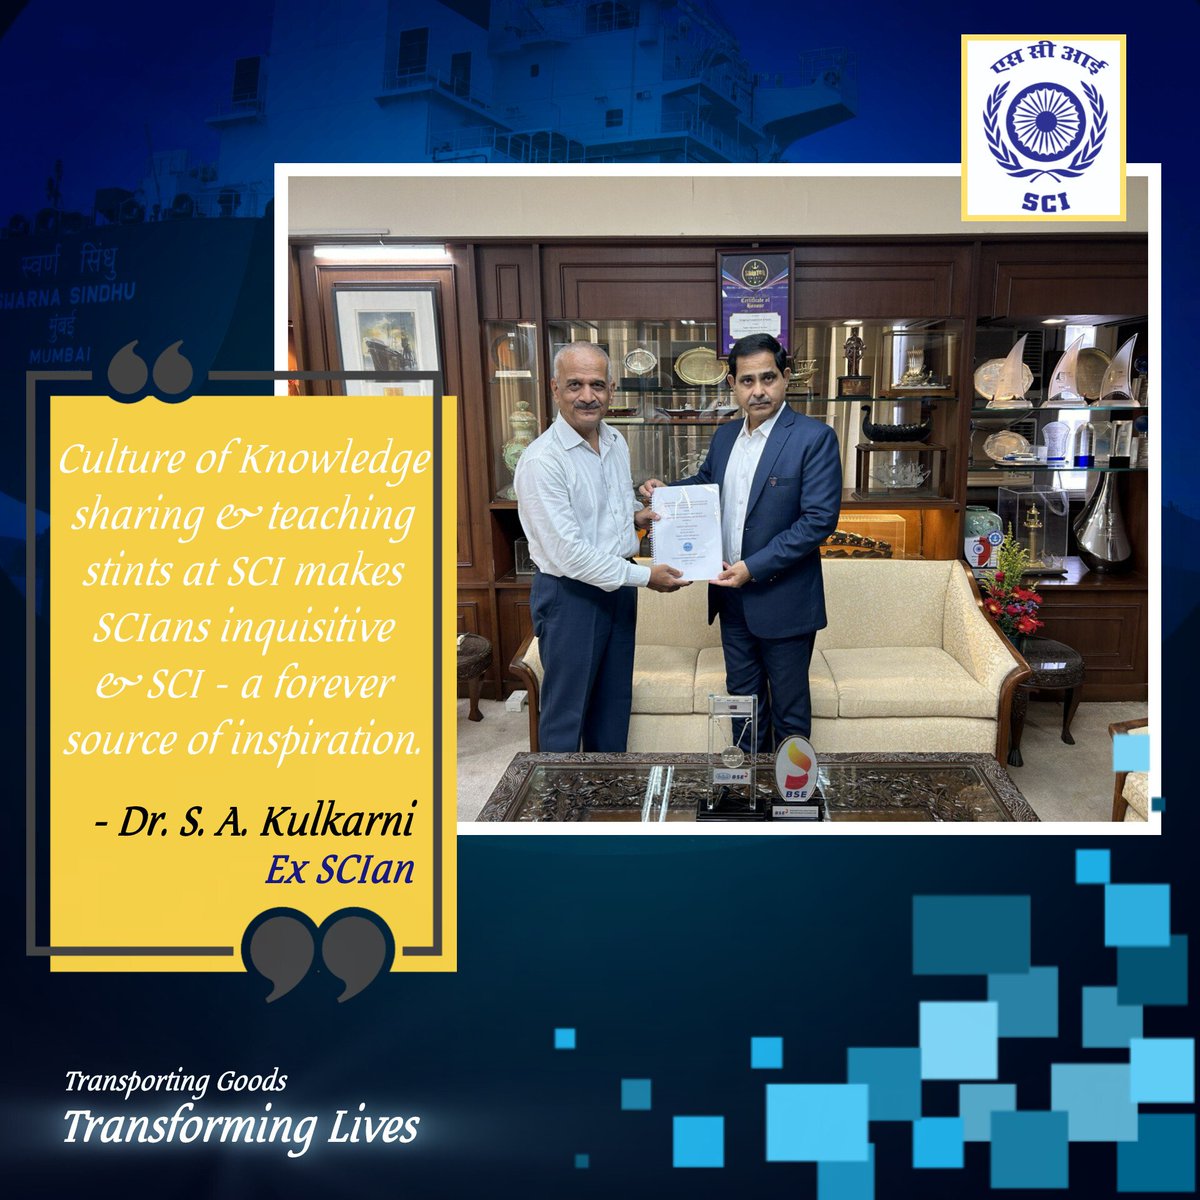 SCI has been #TransformingLives by providing a work culture that stimulates Learning, Research Skills & Inquisitiveness for Personal & Professional Growth. Here is an example of Mr. S A Kulkarni, who went on to obtain PhD after retirement based on the experience he gained at SCI.